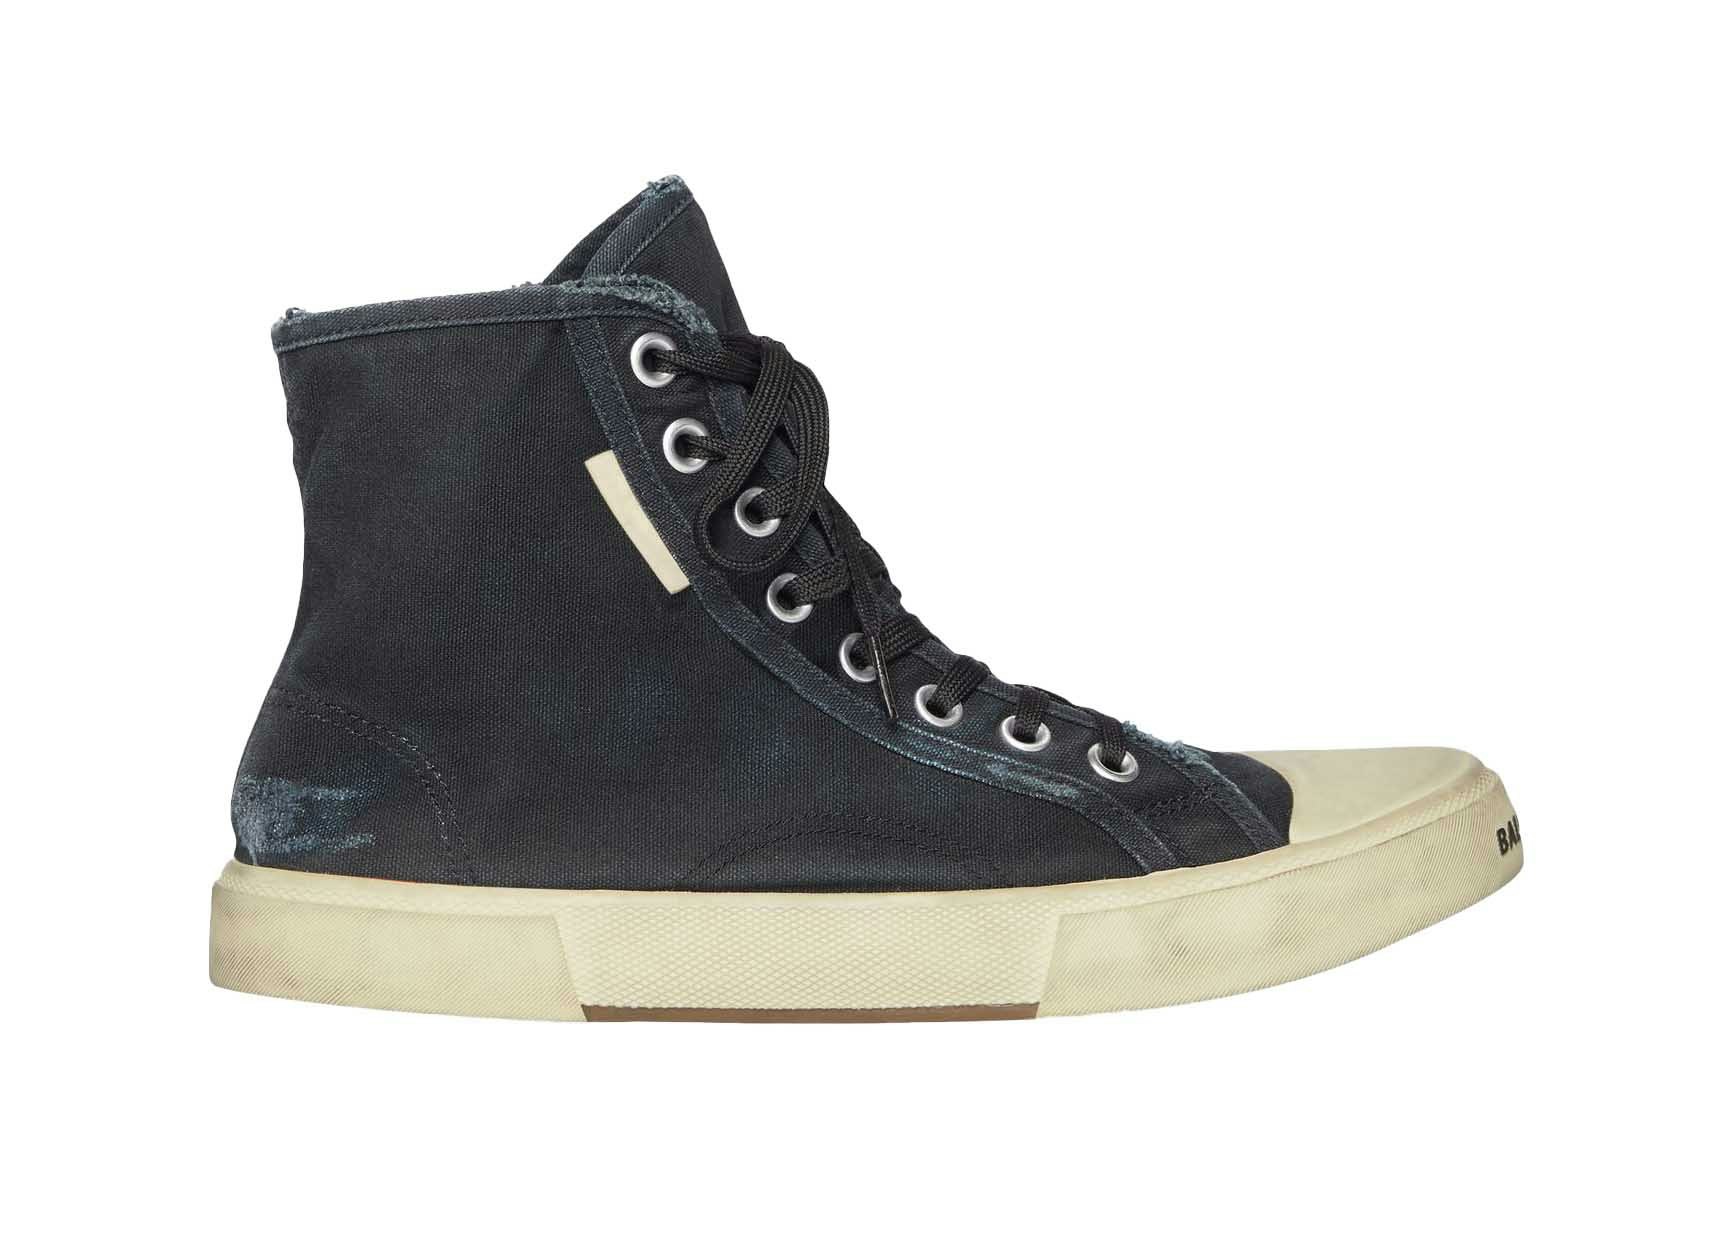 Authentic Second Hand Balenciaga Marble HighTop Sneakers PSS05900088   THE FIFTH COLLECTION